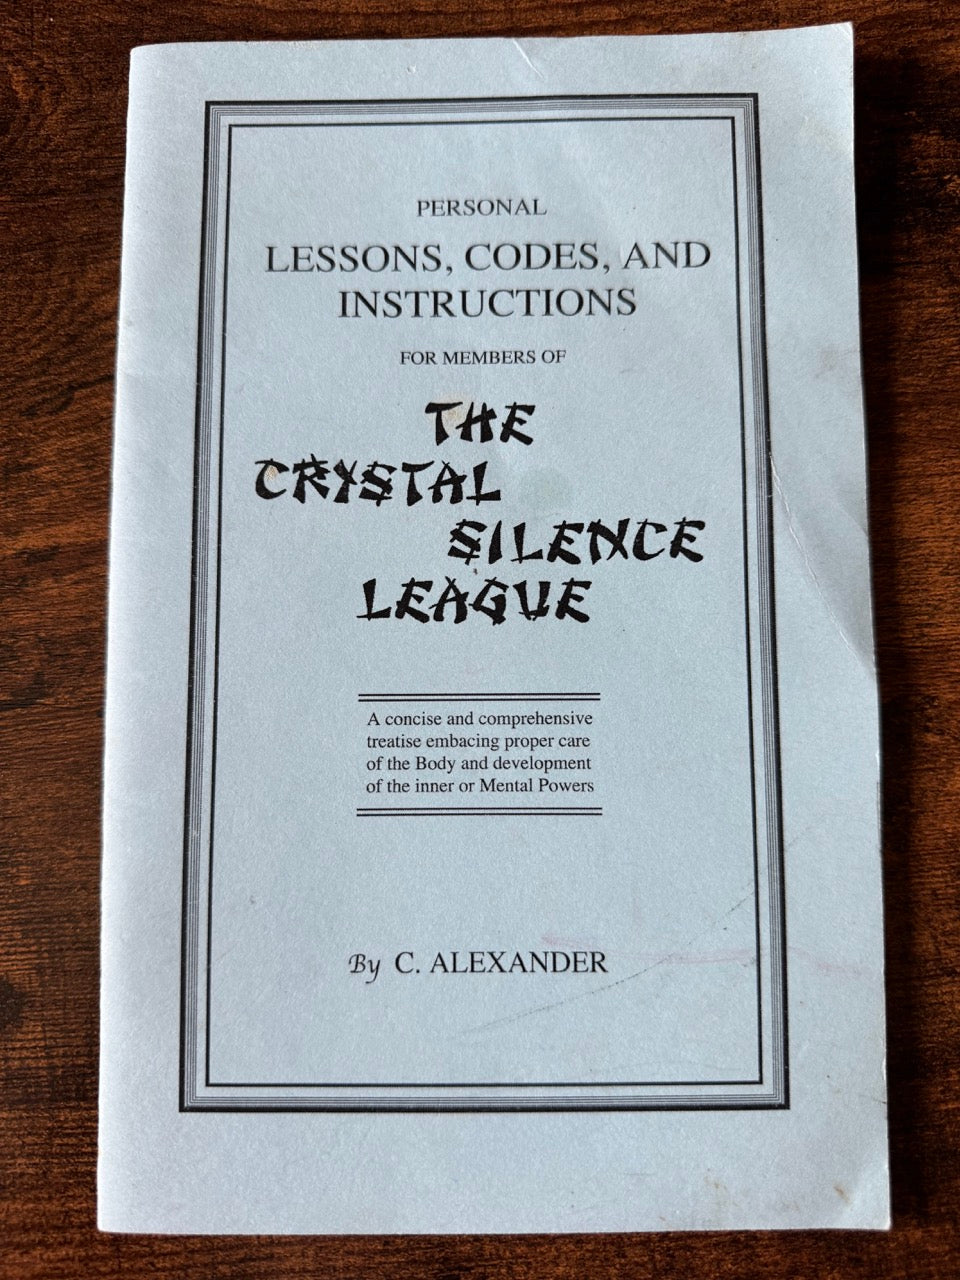 Personal Lessons, Codes and Instructions for Members of The Crystal Silence League - C. Alexander